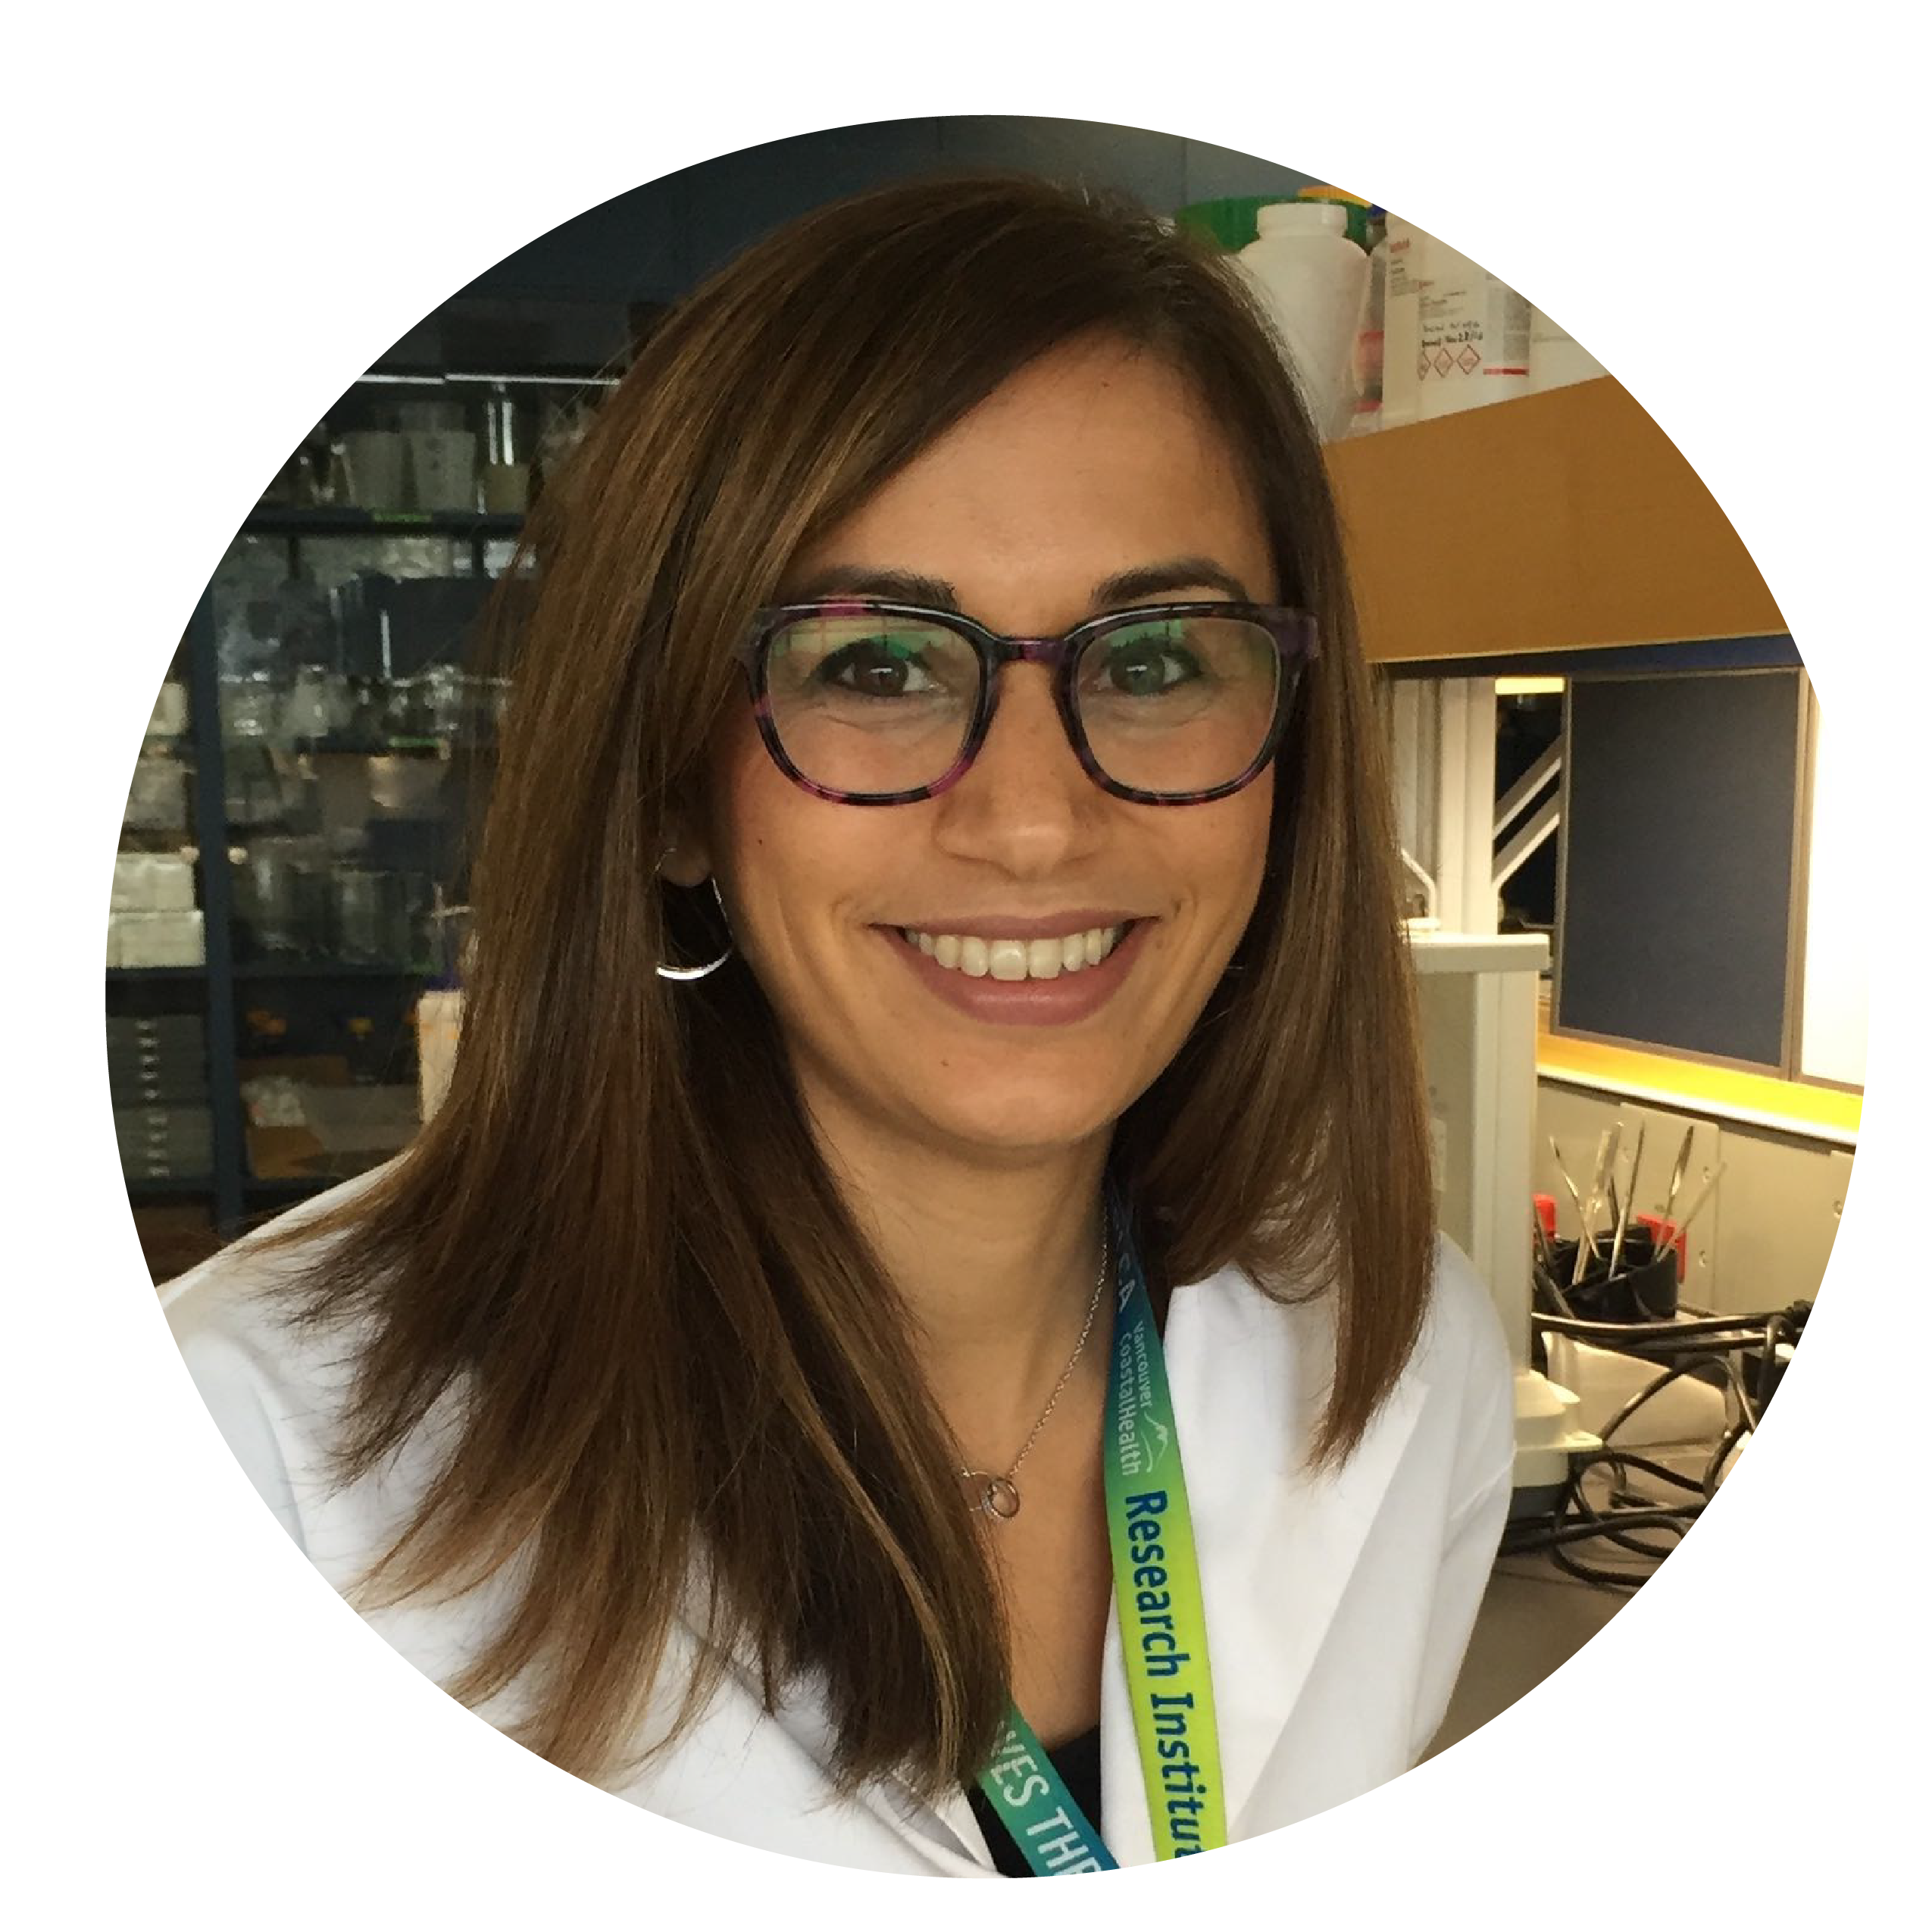 A woman in a white coat, green lanyard and brown glasses with medium lenght brown hair